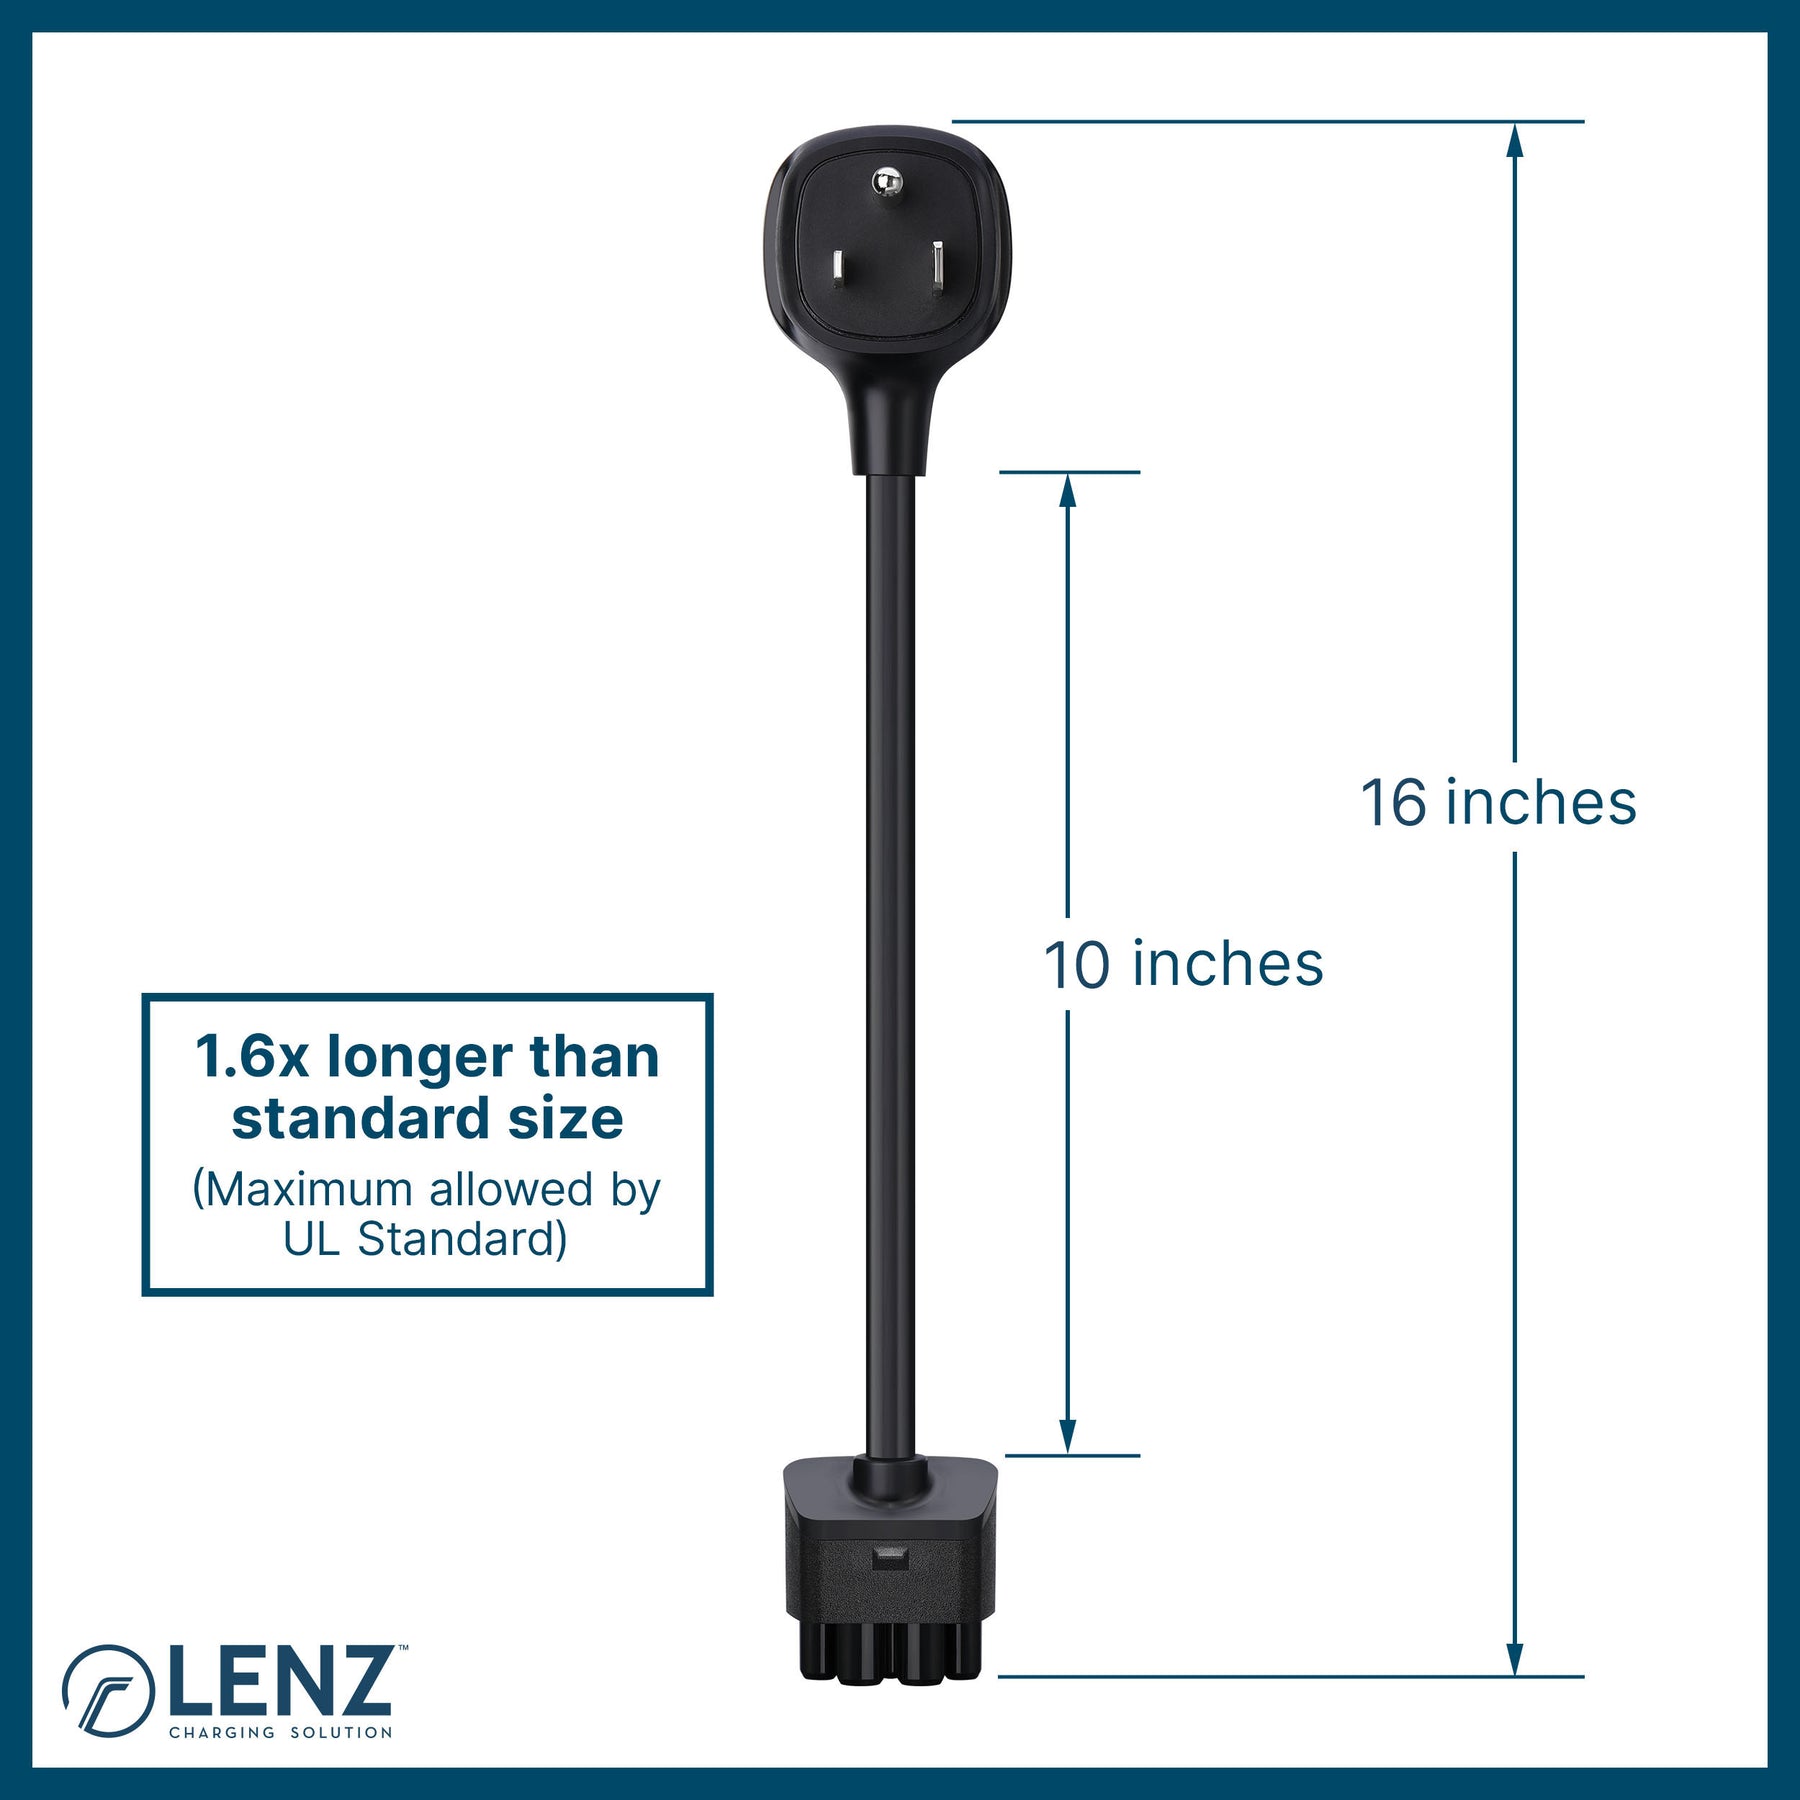 LENZ NEMA 6-50 Adapter for Tesla Gen 2 Mobile Connector Measures 16 inches end-to-end